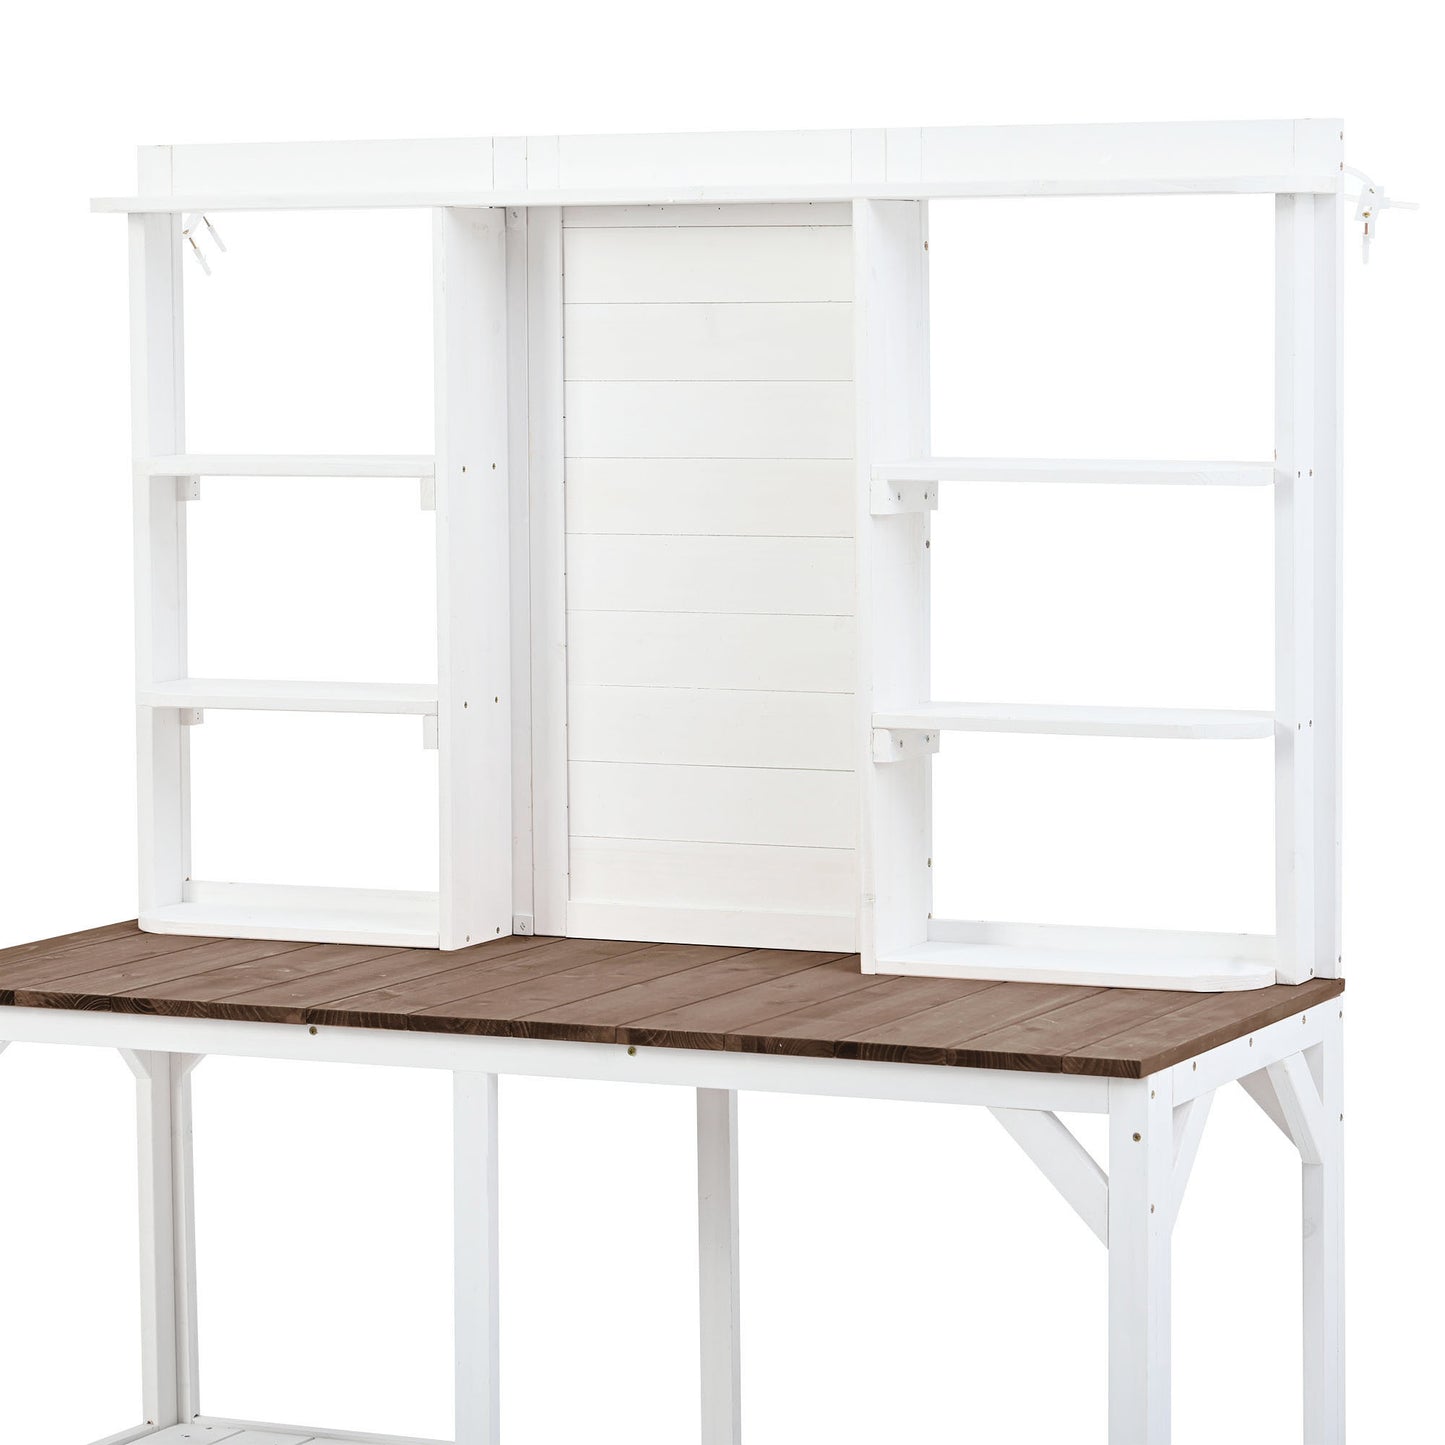 TOPMAX 64.6" Large Outdoor Potting Bench, Garden Potting Table, Wood Workstation with 6-Tier Shelves, Large Tabletop and Side Hook for Mudroom, Backyard,White